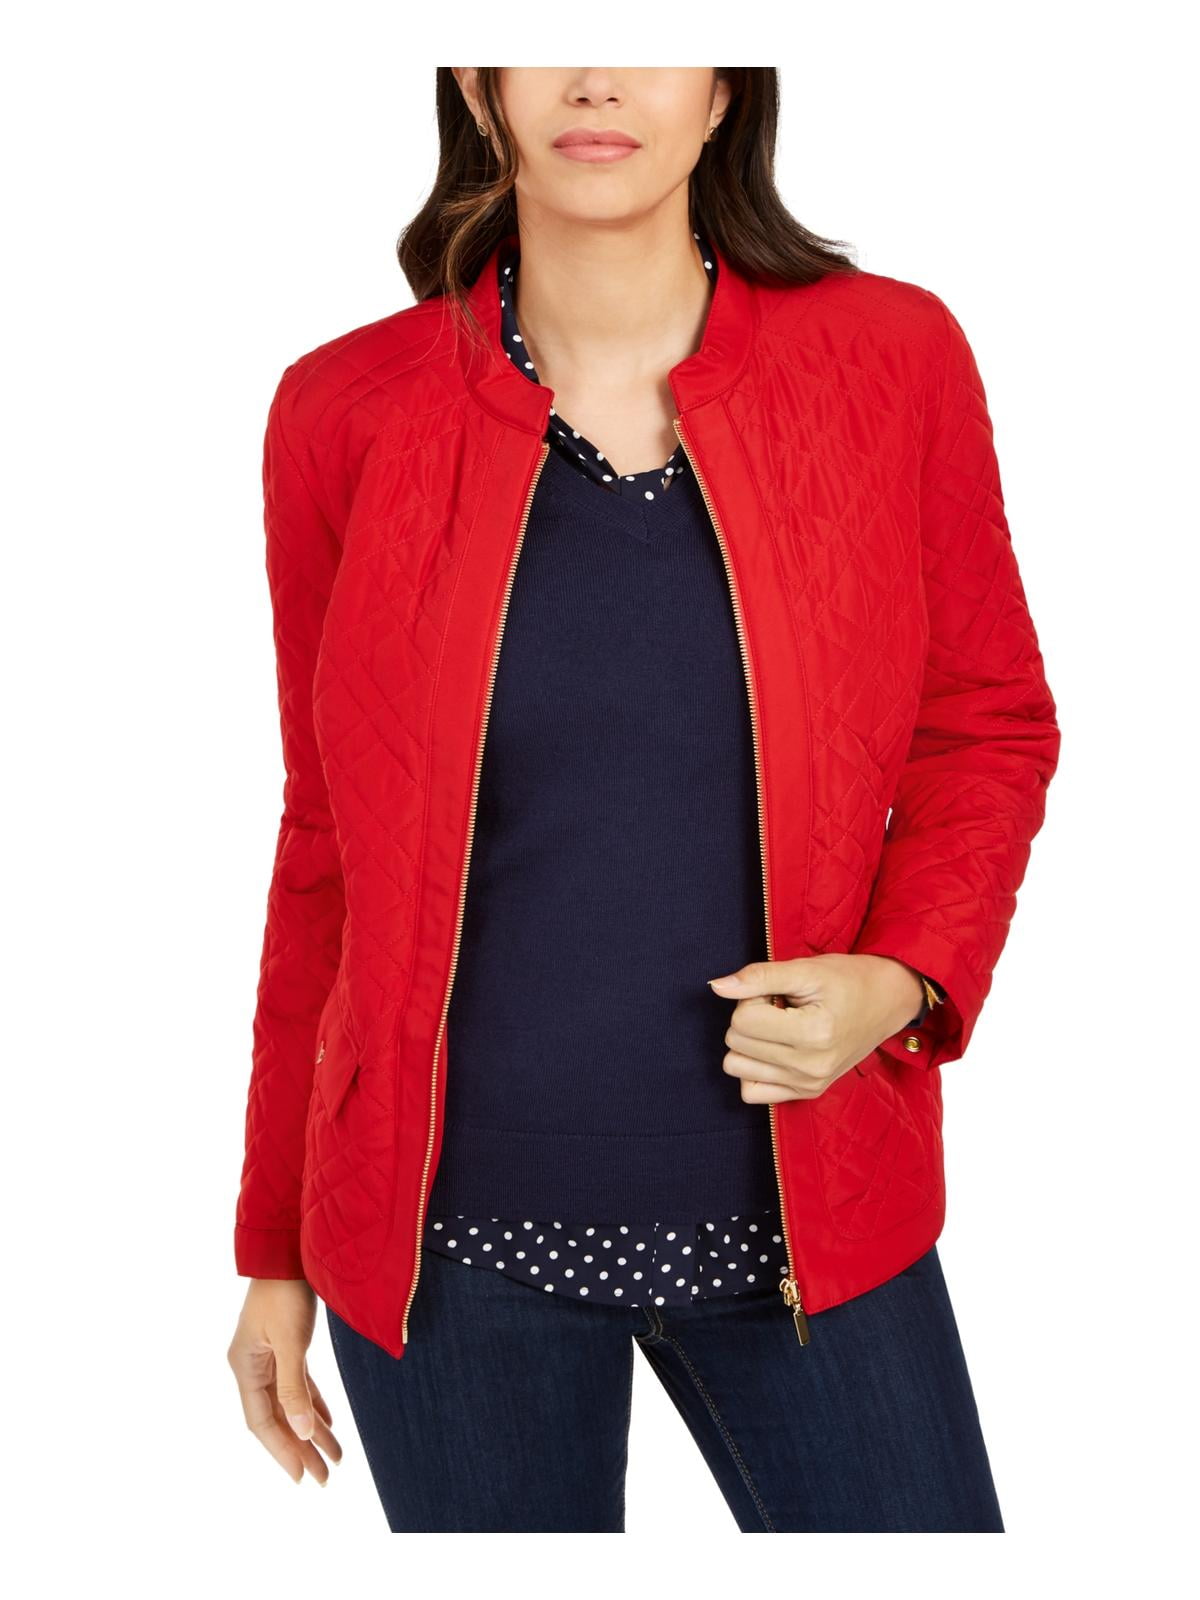 Charter Club Womens Quilted Lightweight Jacket Red S 